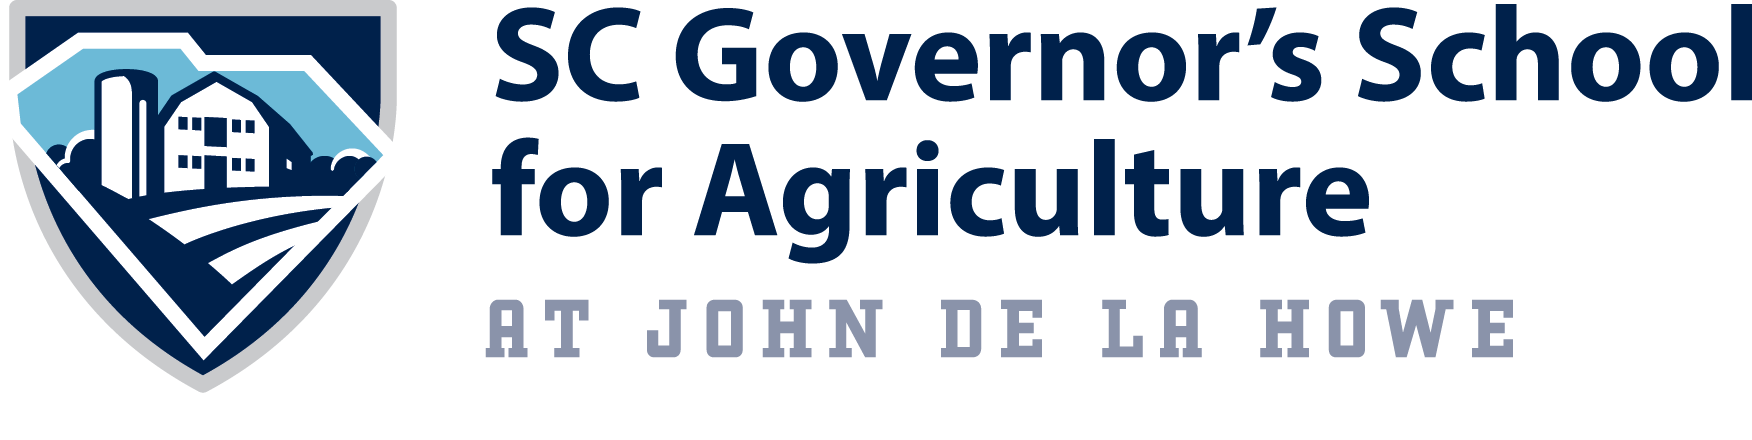 Governor's School for Agriculture Logo